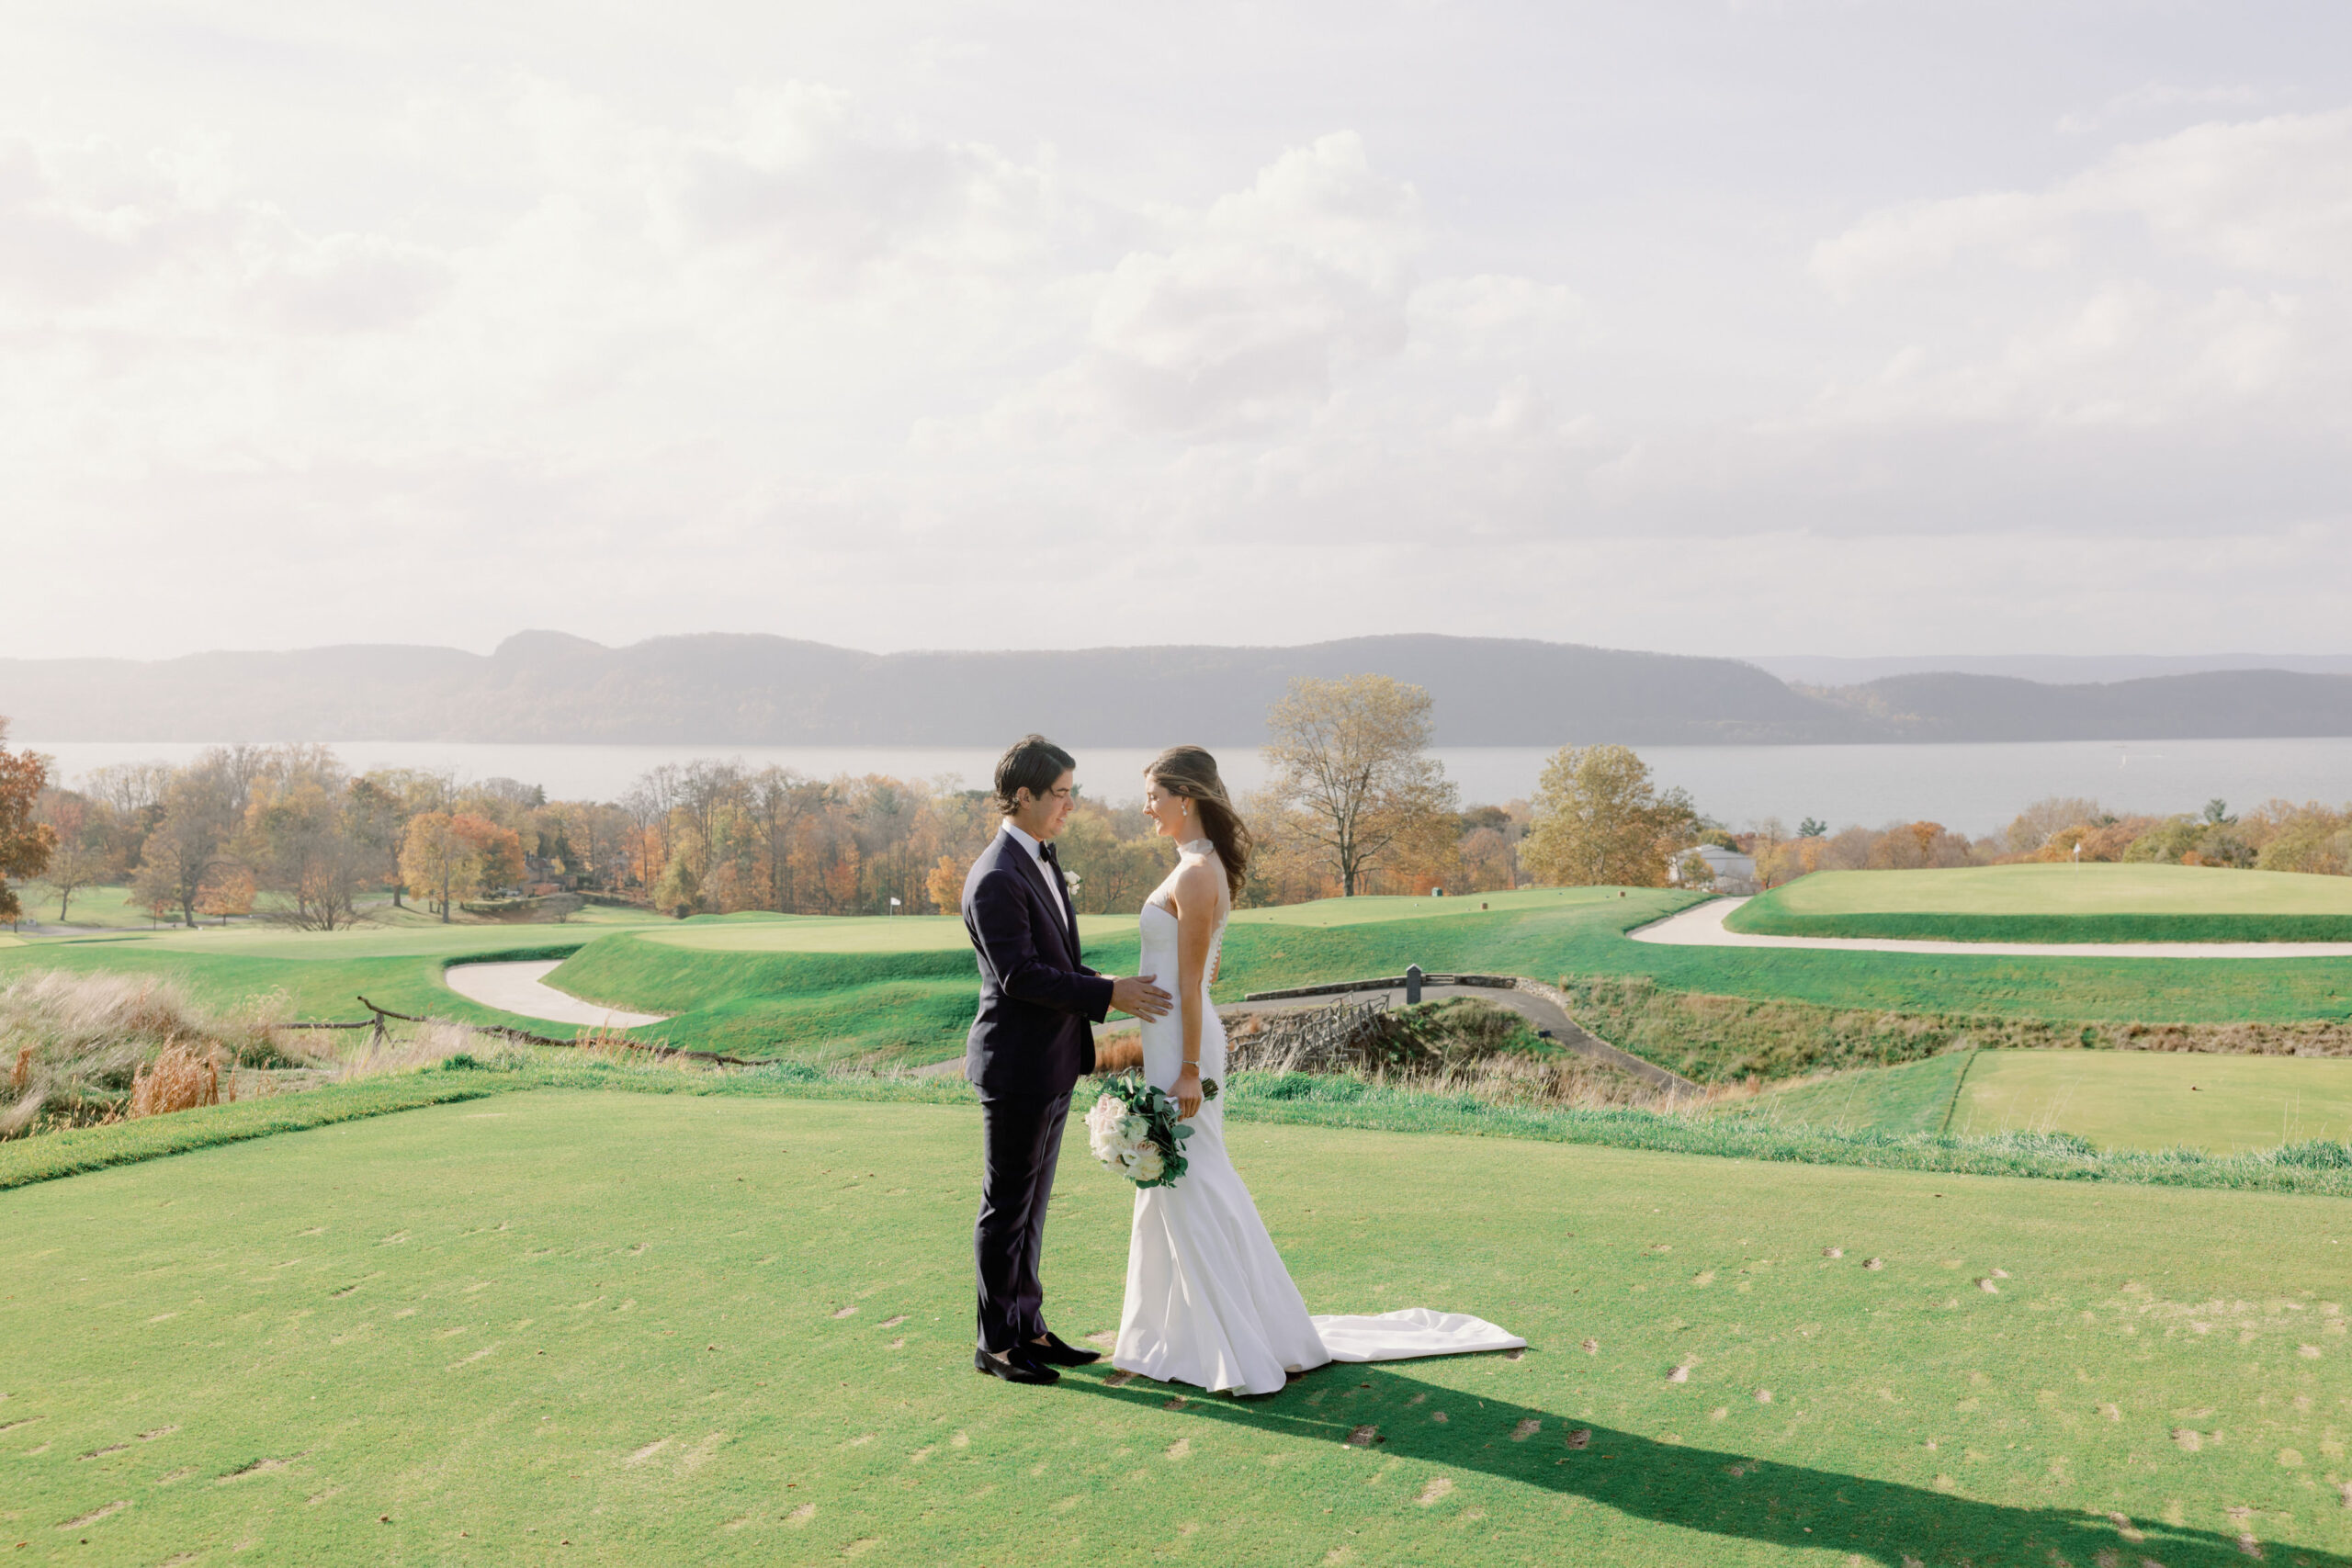 Editorial photo of the bride and groom with gold course in the background at Sleepy Hollow Countryclub, NY.  Image by Jenny Fu Studio 